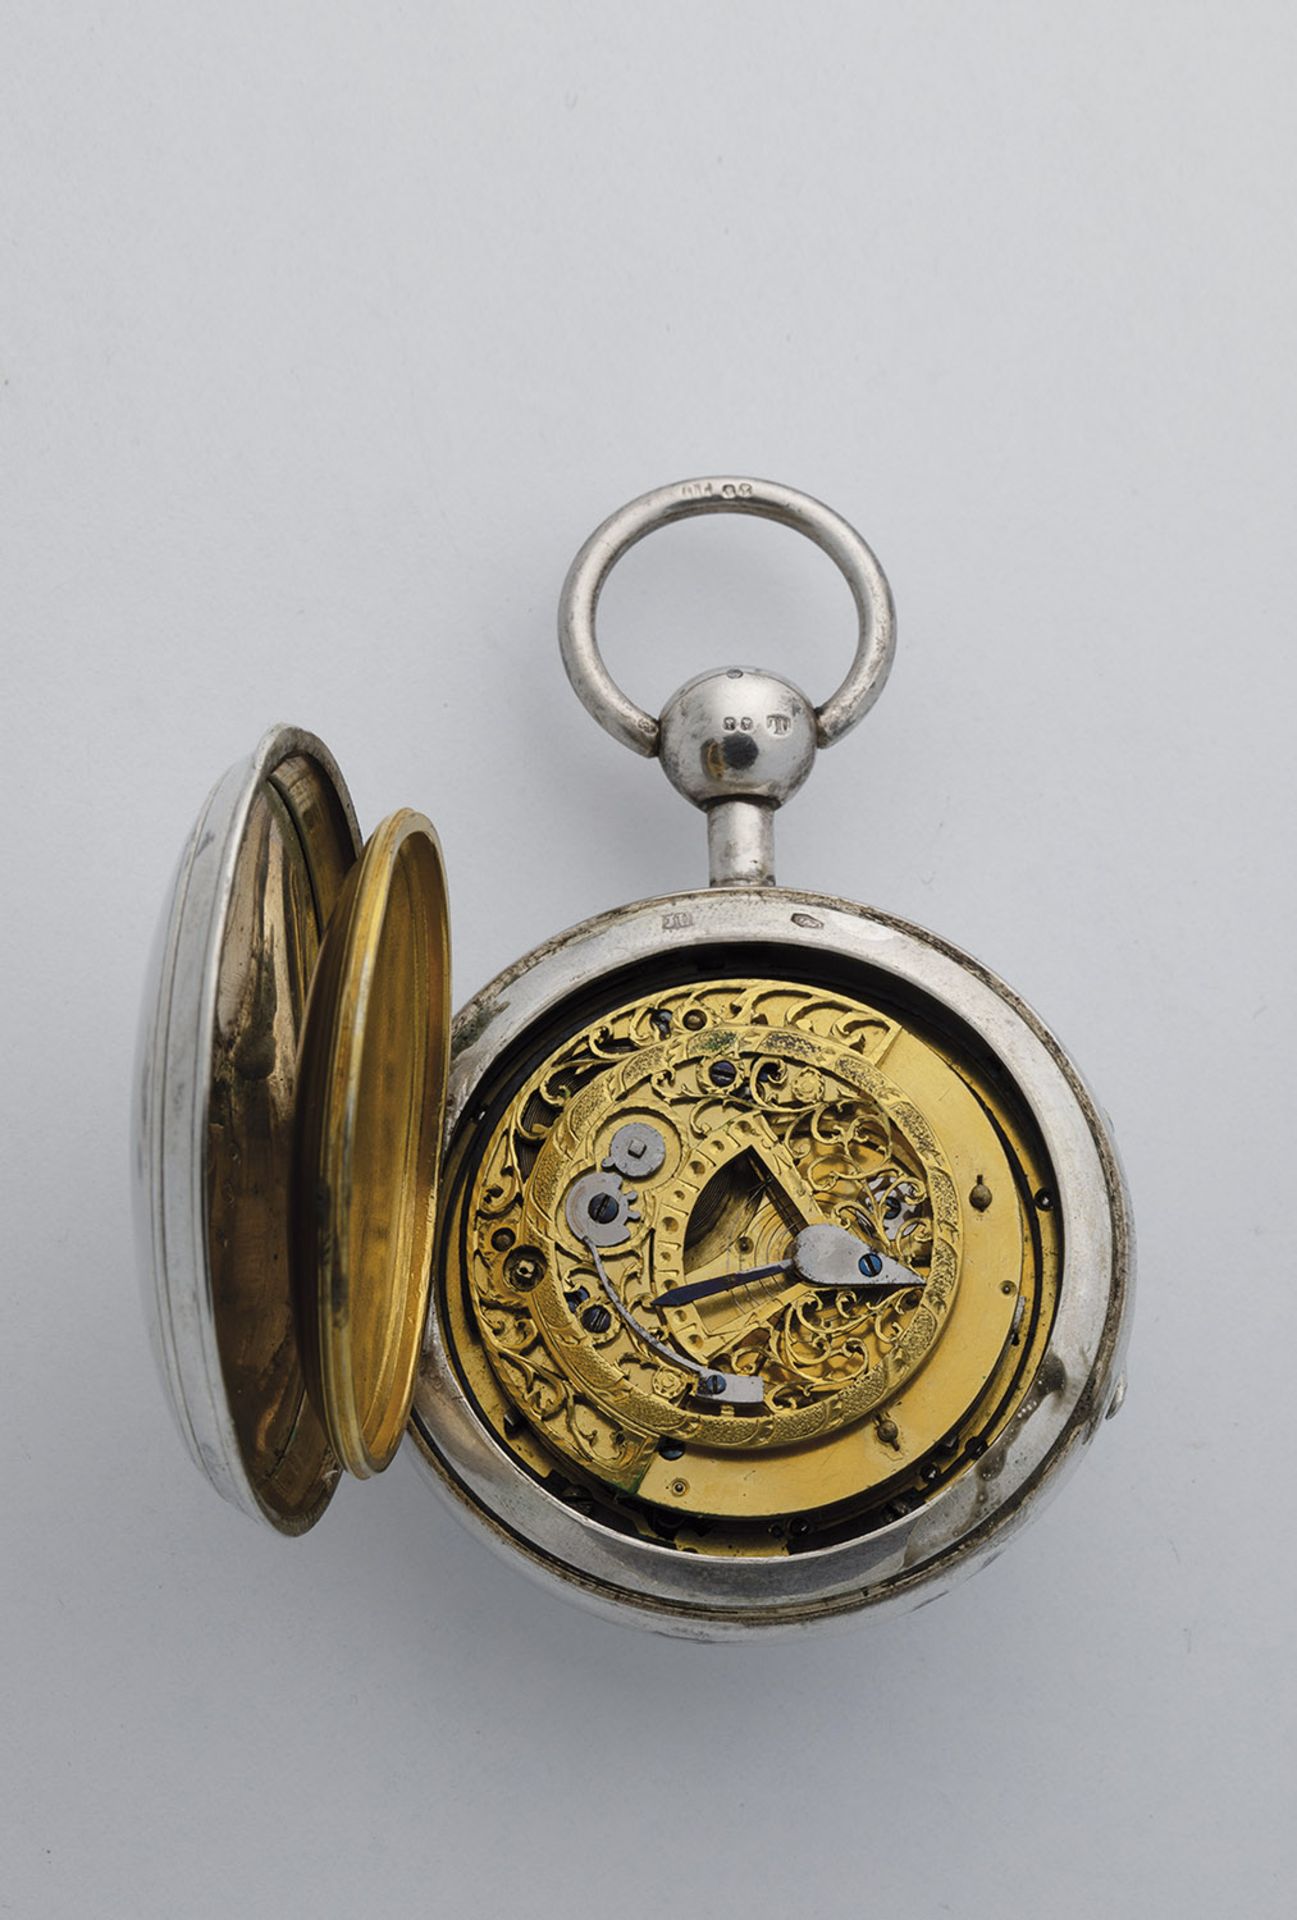 Spindle pocket watch - Image 2 of 3